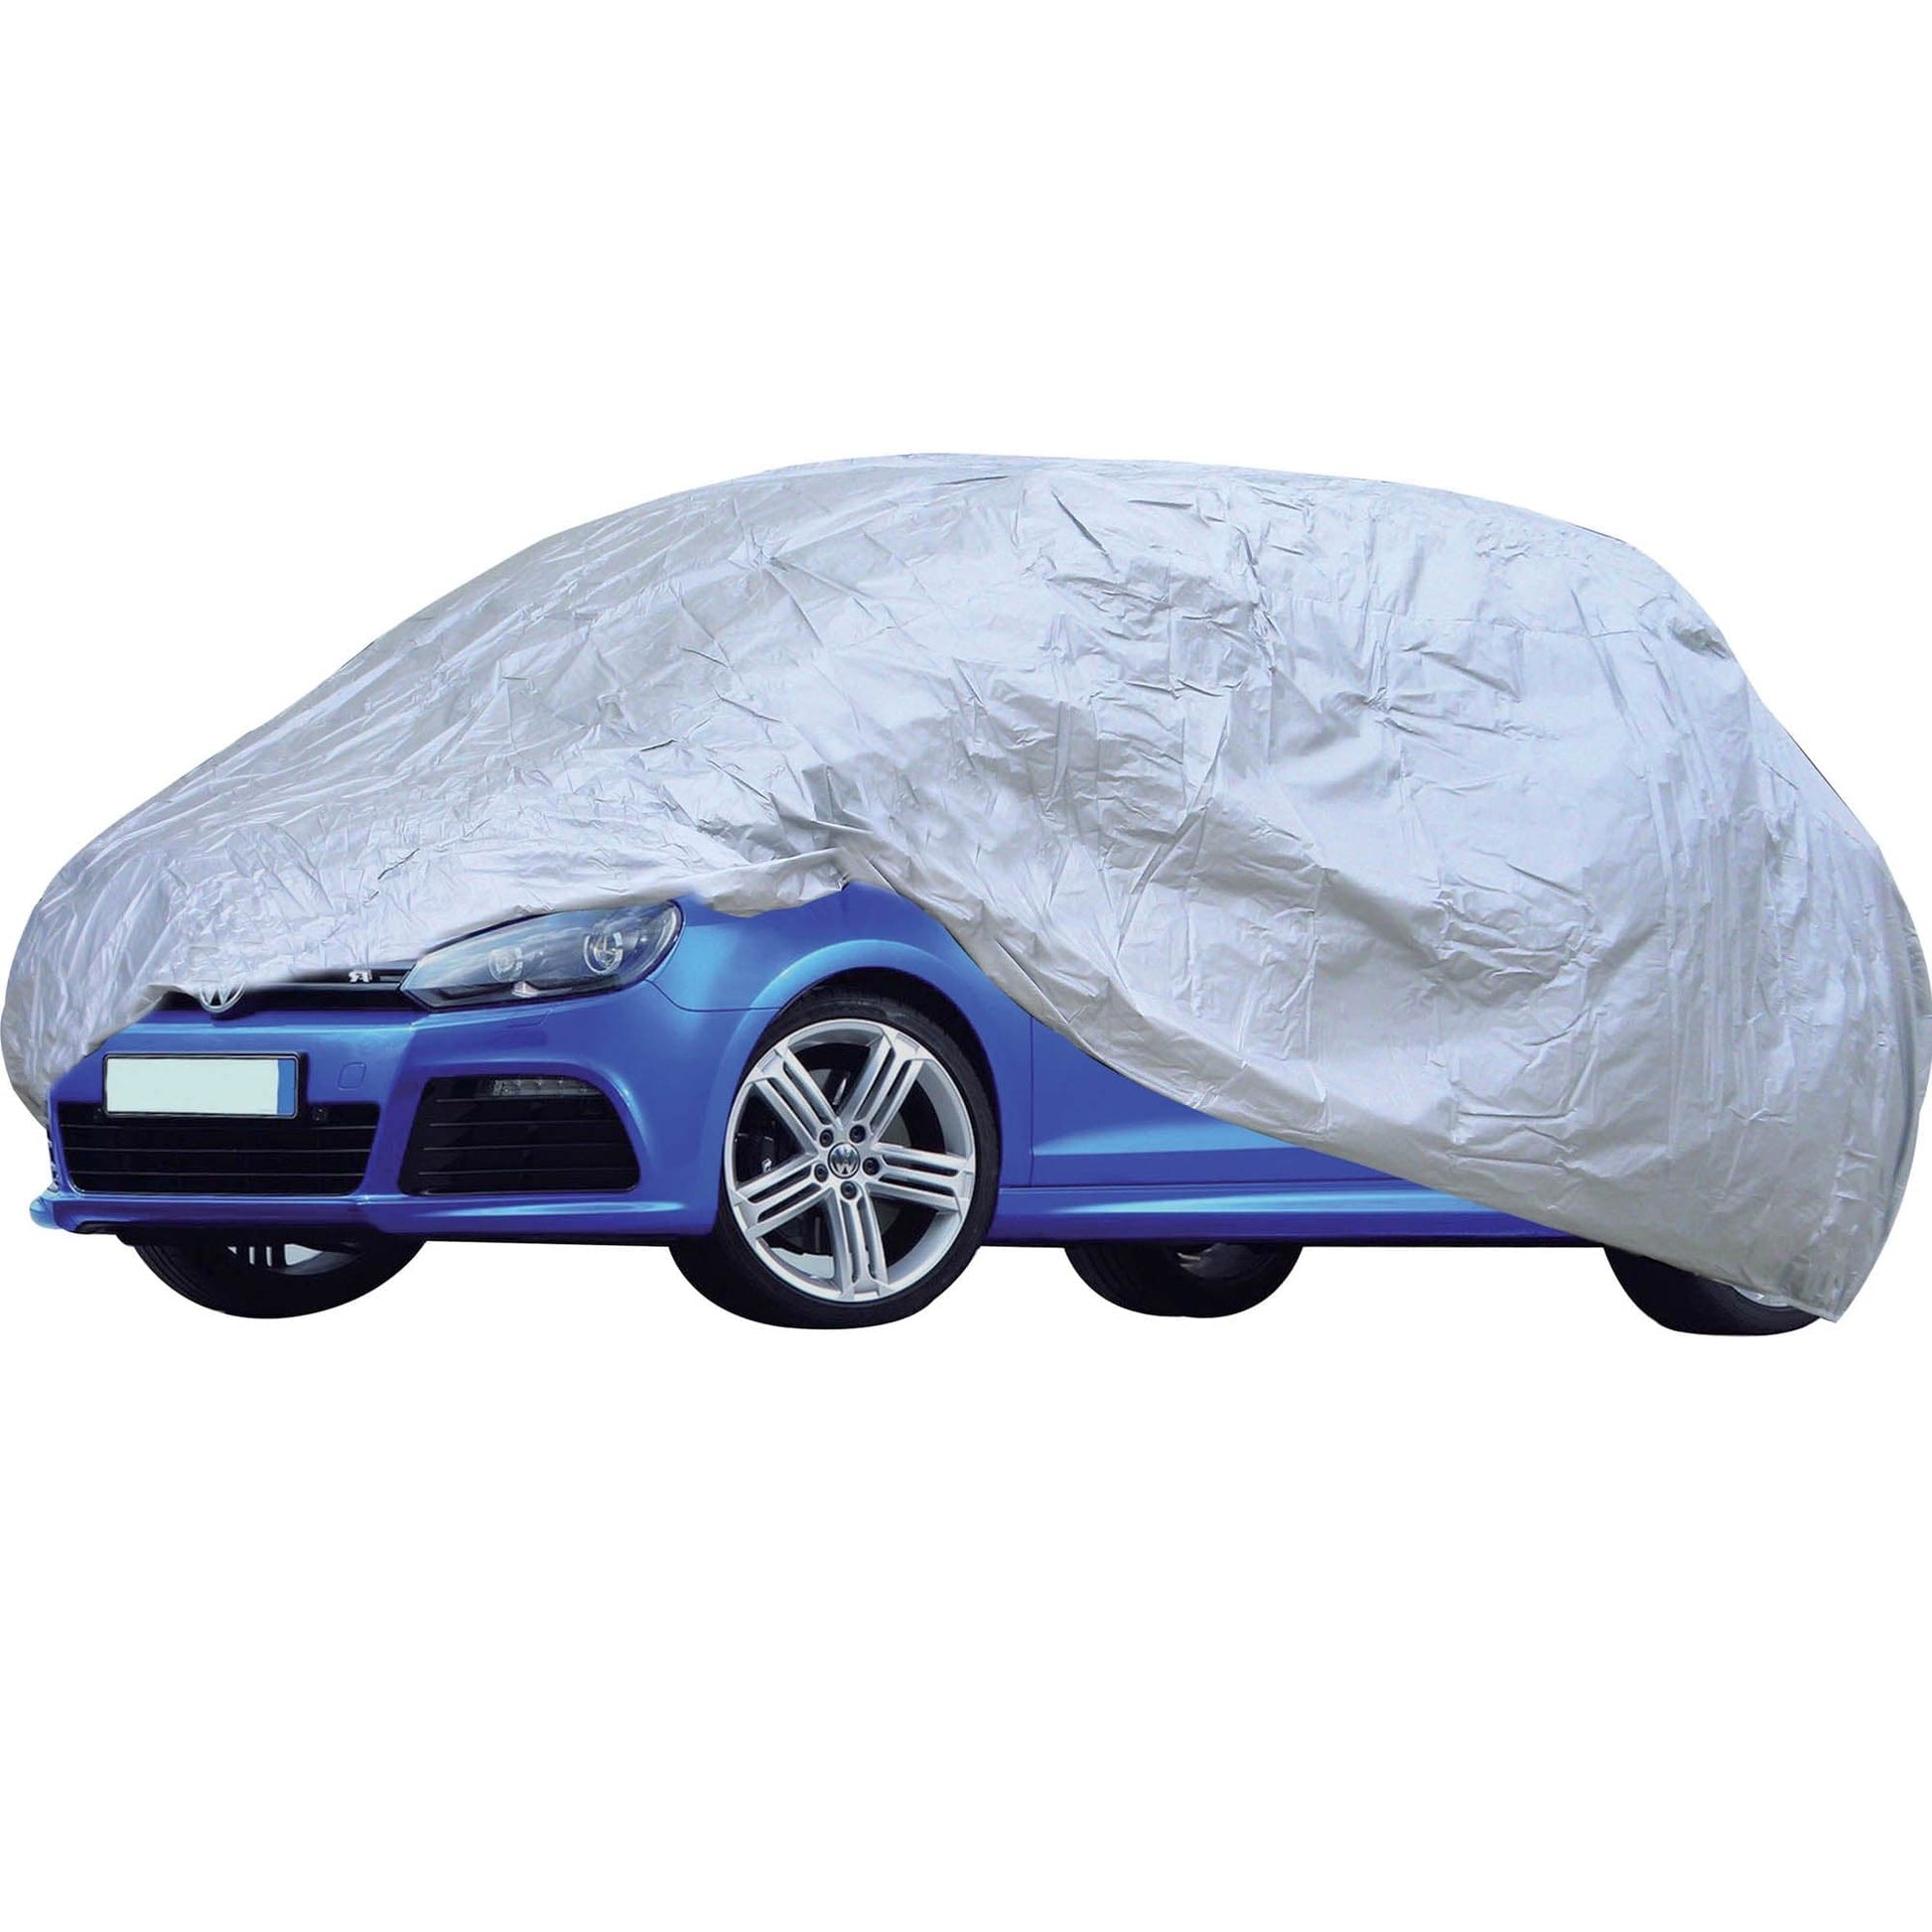 WATERPROOF CAR COVER SIZE L - best price from Maltashopper.com BR490000817